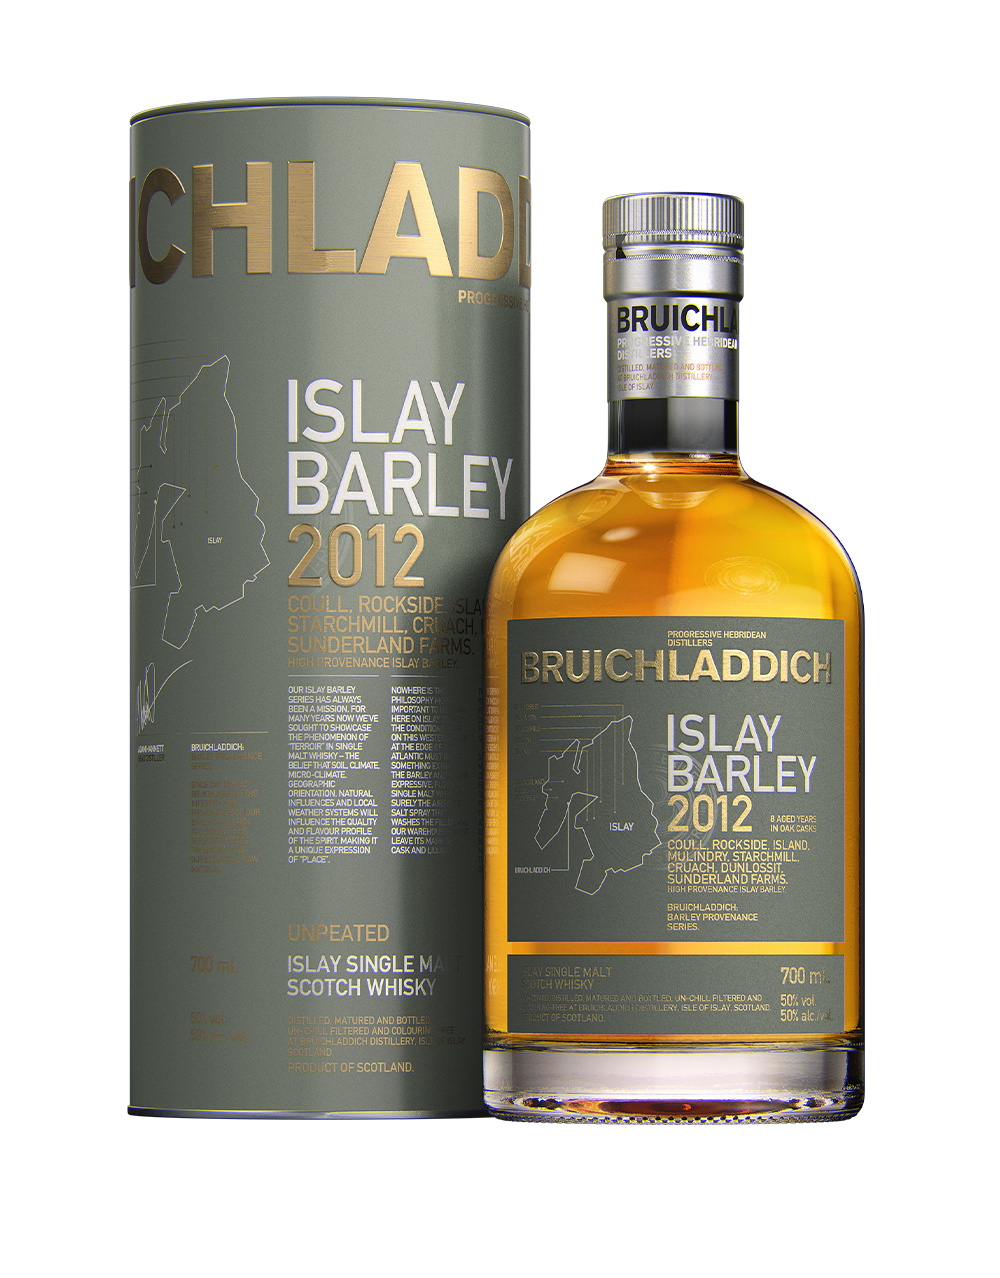 Port Charlotte 10 Year Old Islay Single Malt Whisky (70cl) NV, Product  Details